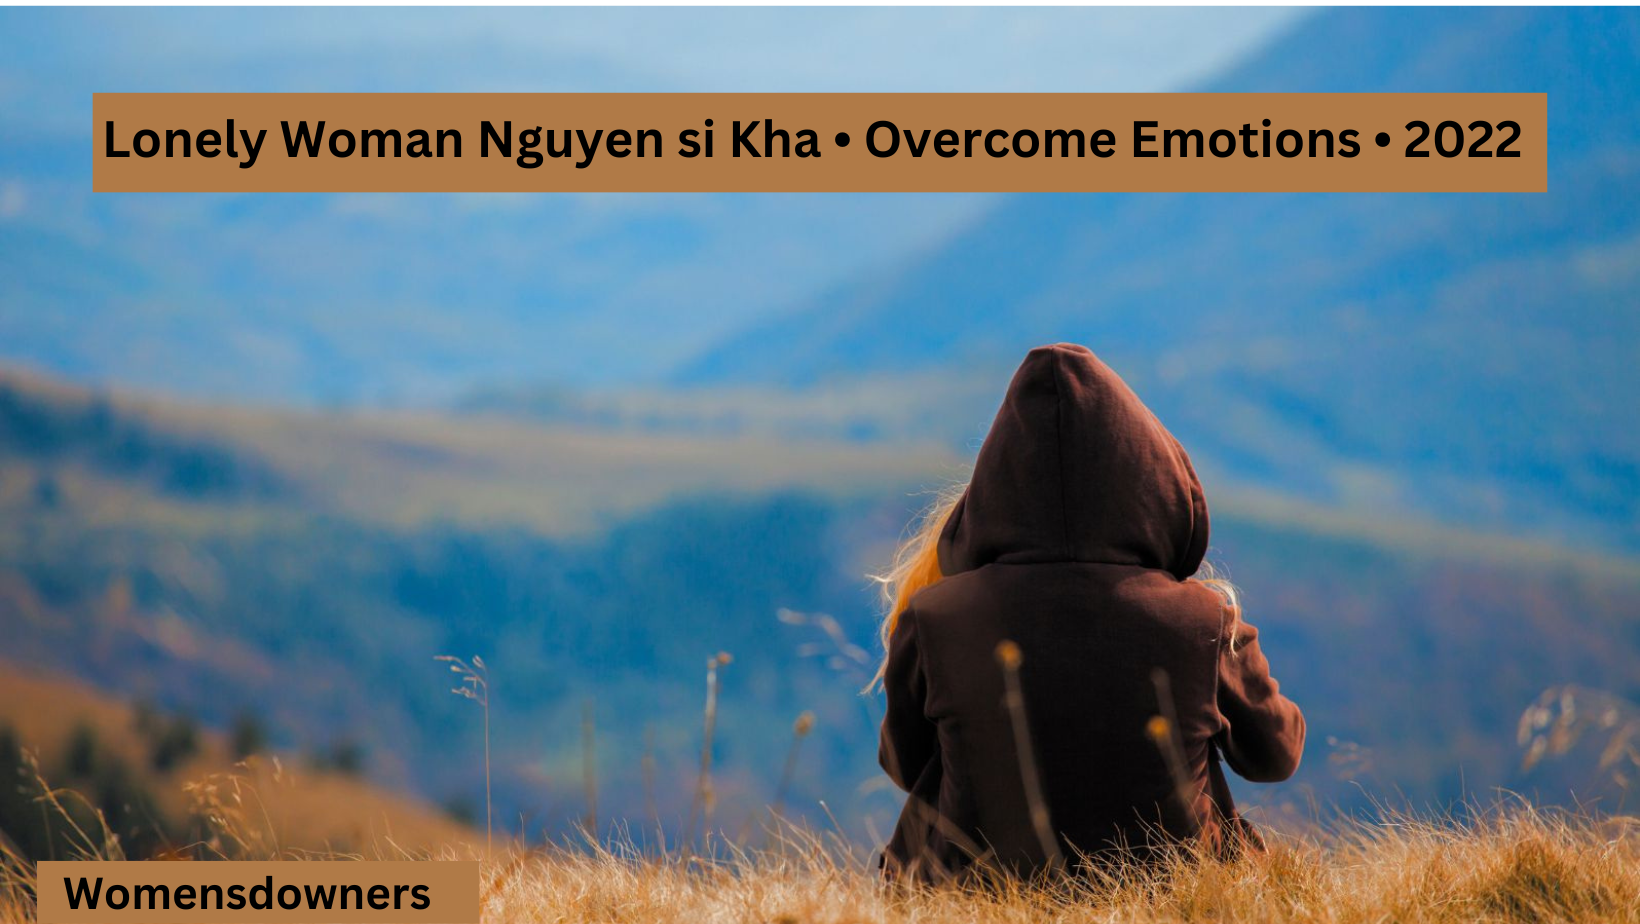 Lonely Woman Nguyen Si Kha • Overcome Emotions • 2022 Guide